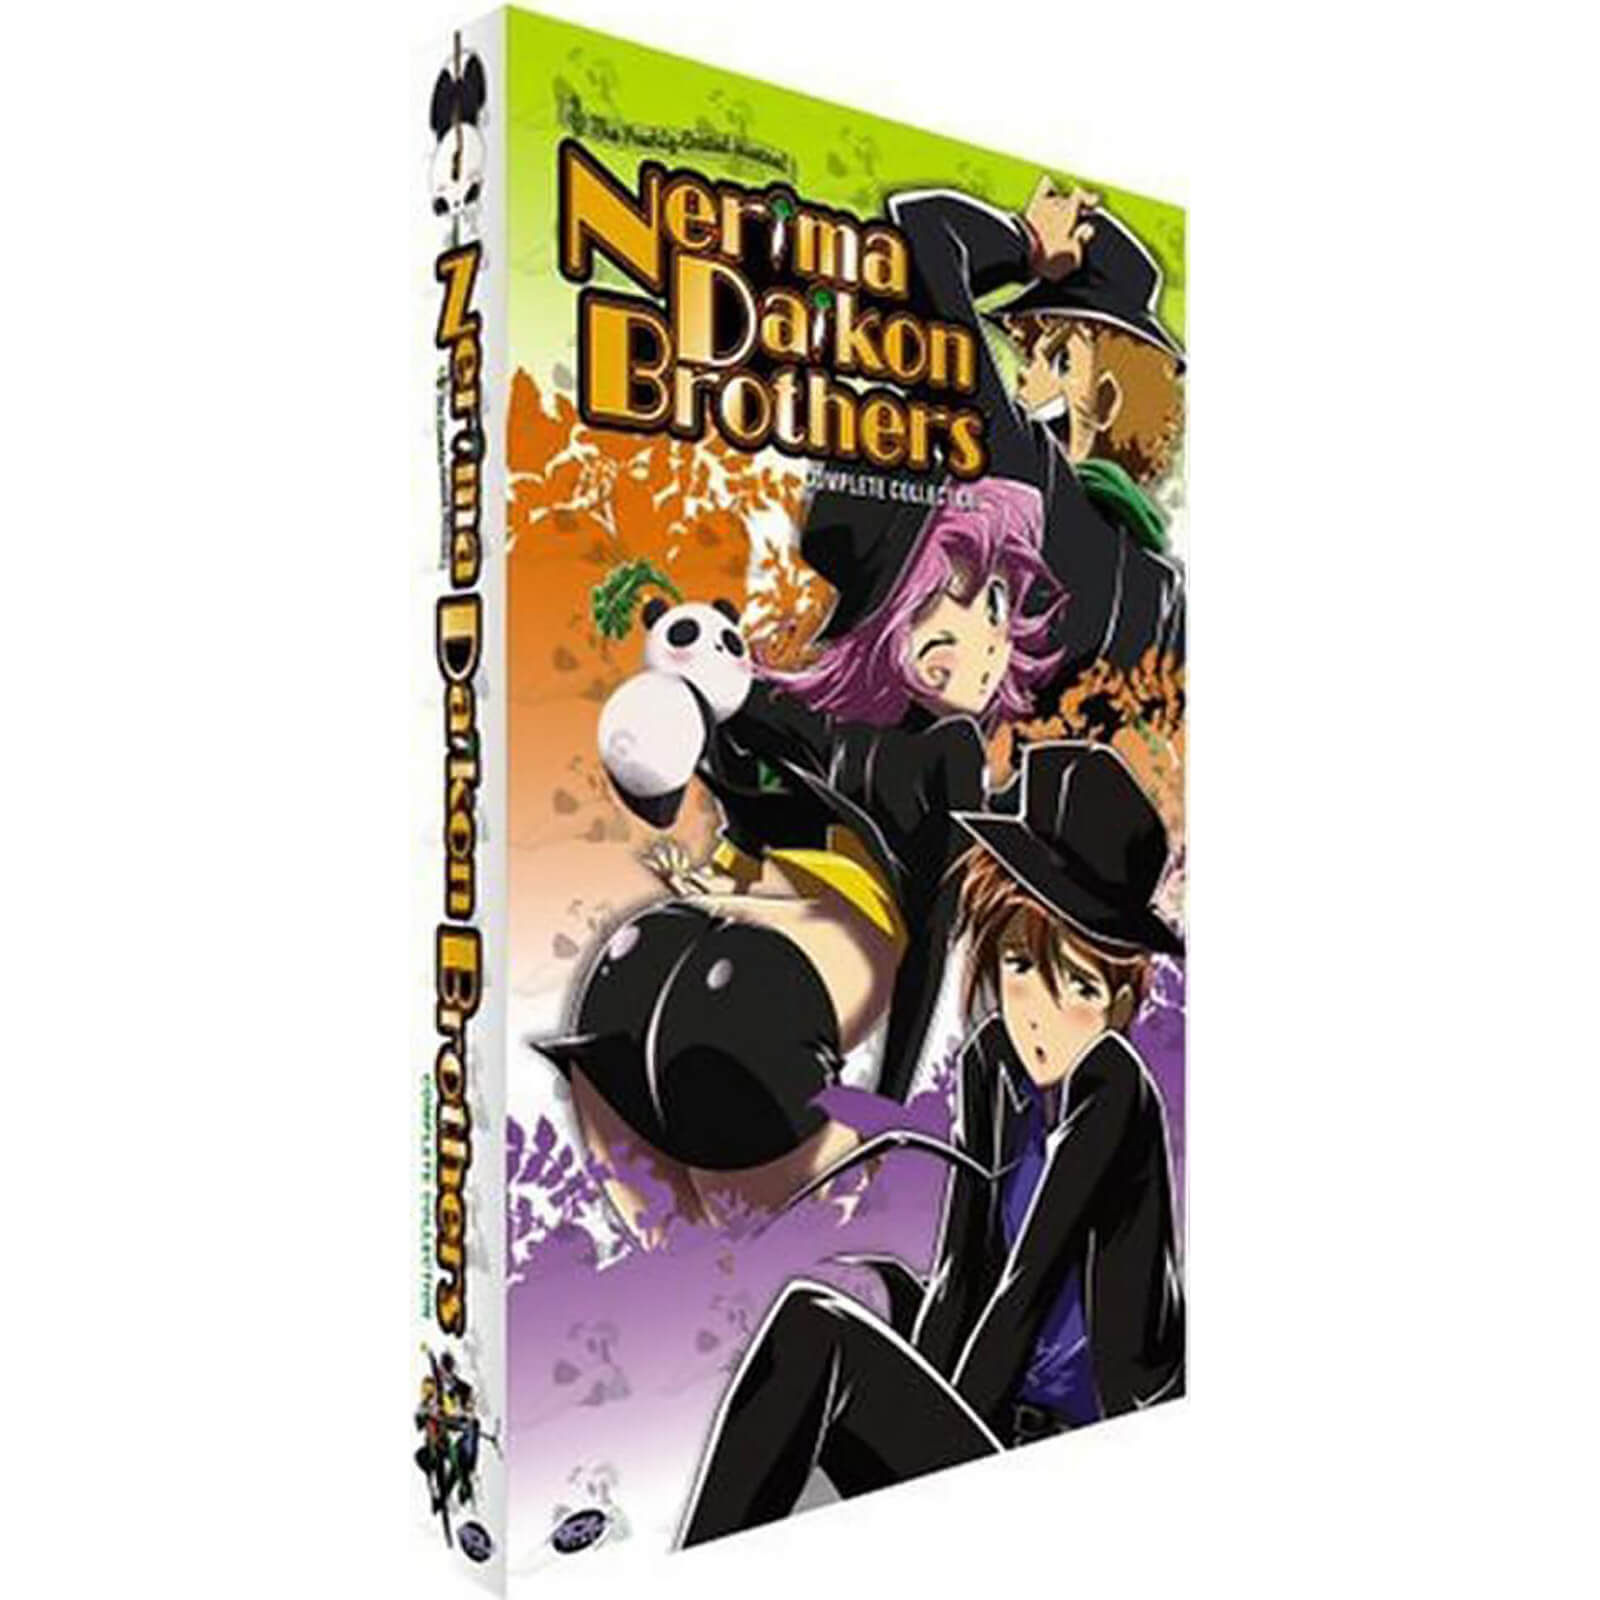 Nerima Daikon Brothers The Complete Collection